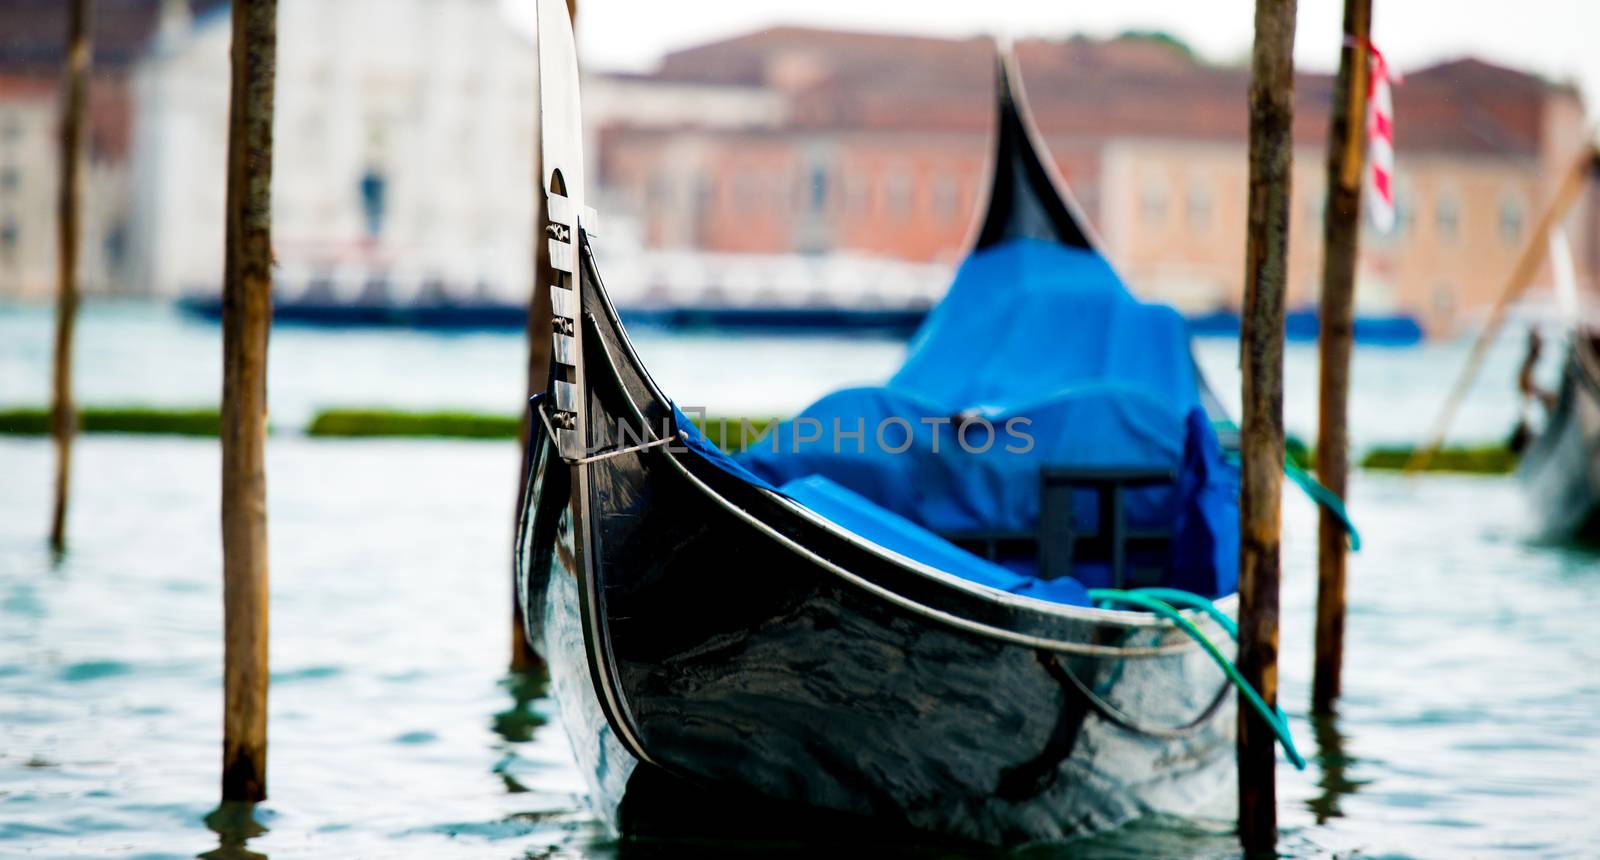 Gondola on the Grand Canal in Venice, Italy